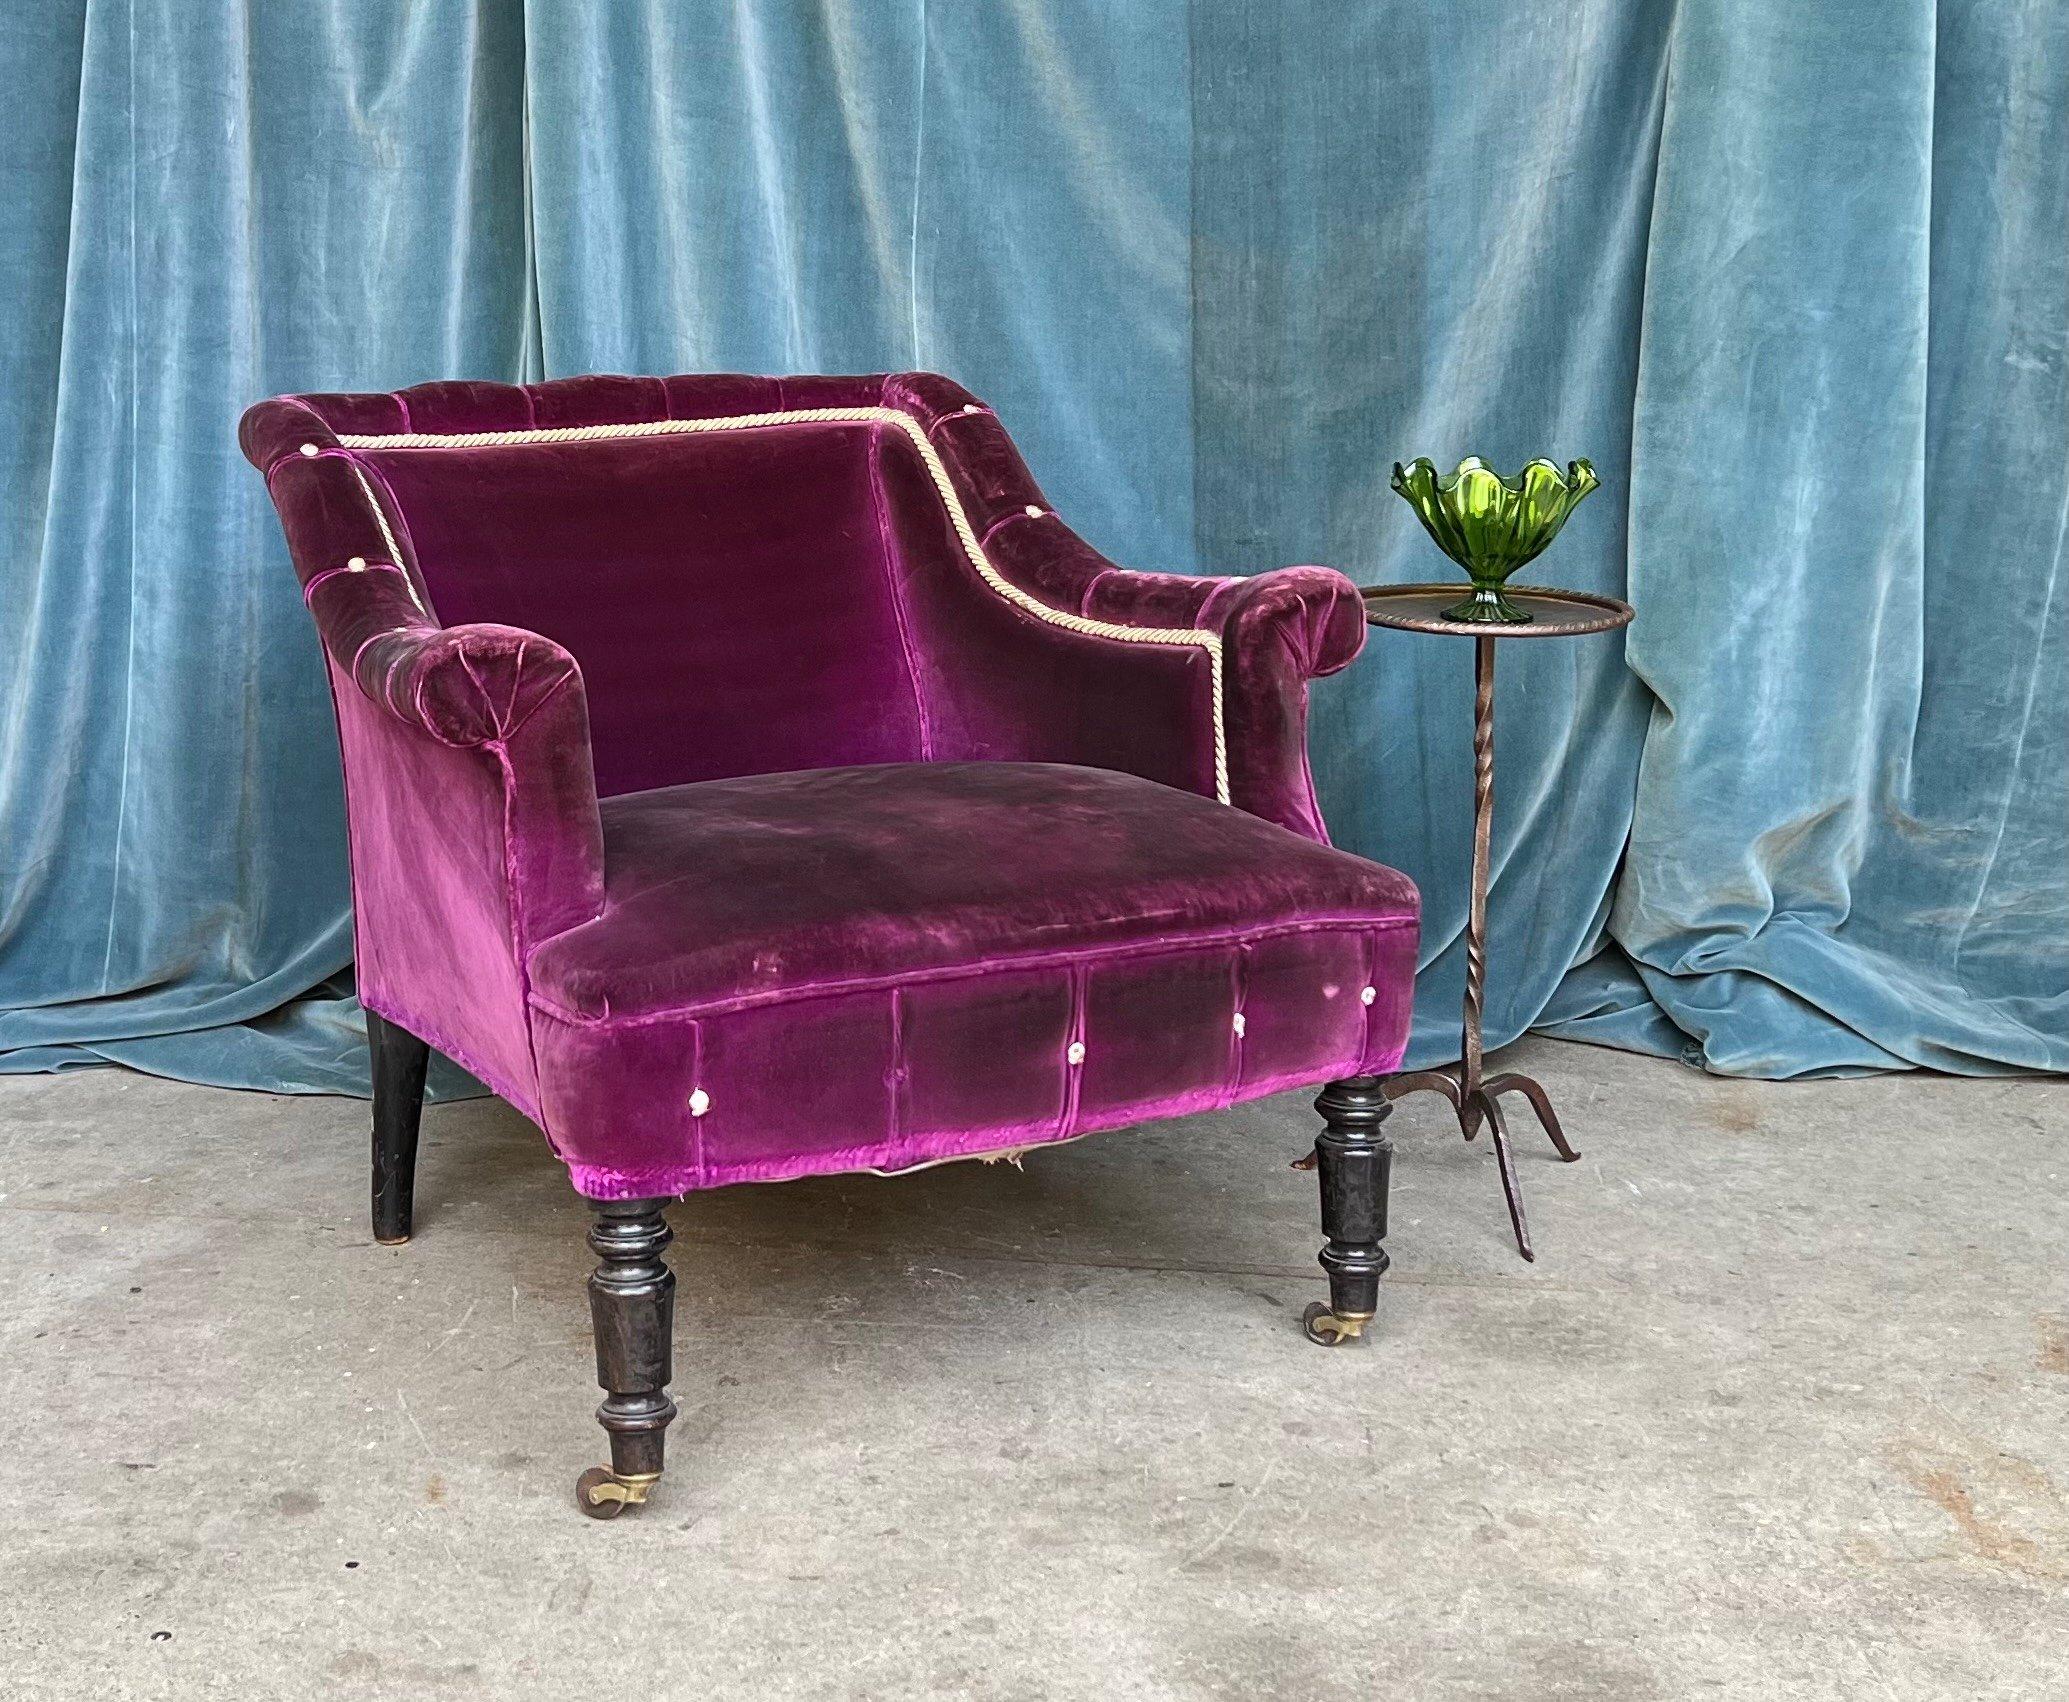 French 19th Century Armchair in Distressed Purple Velvet with White Braided Trim For Sale 8